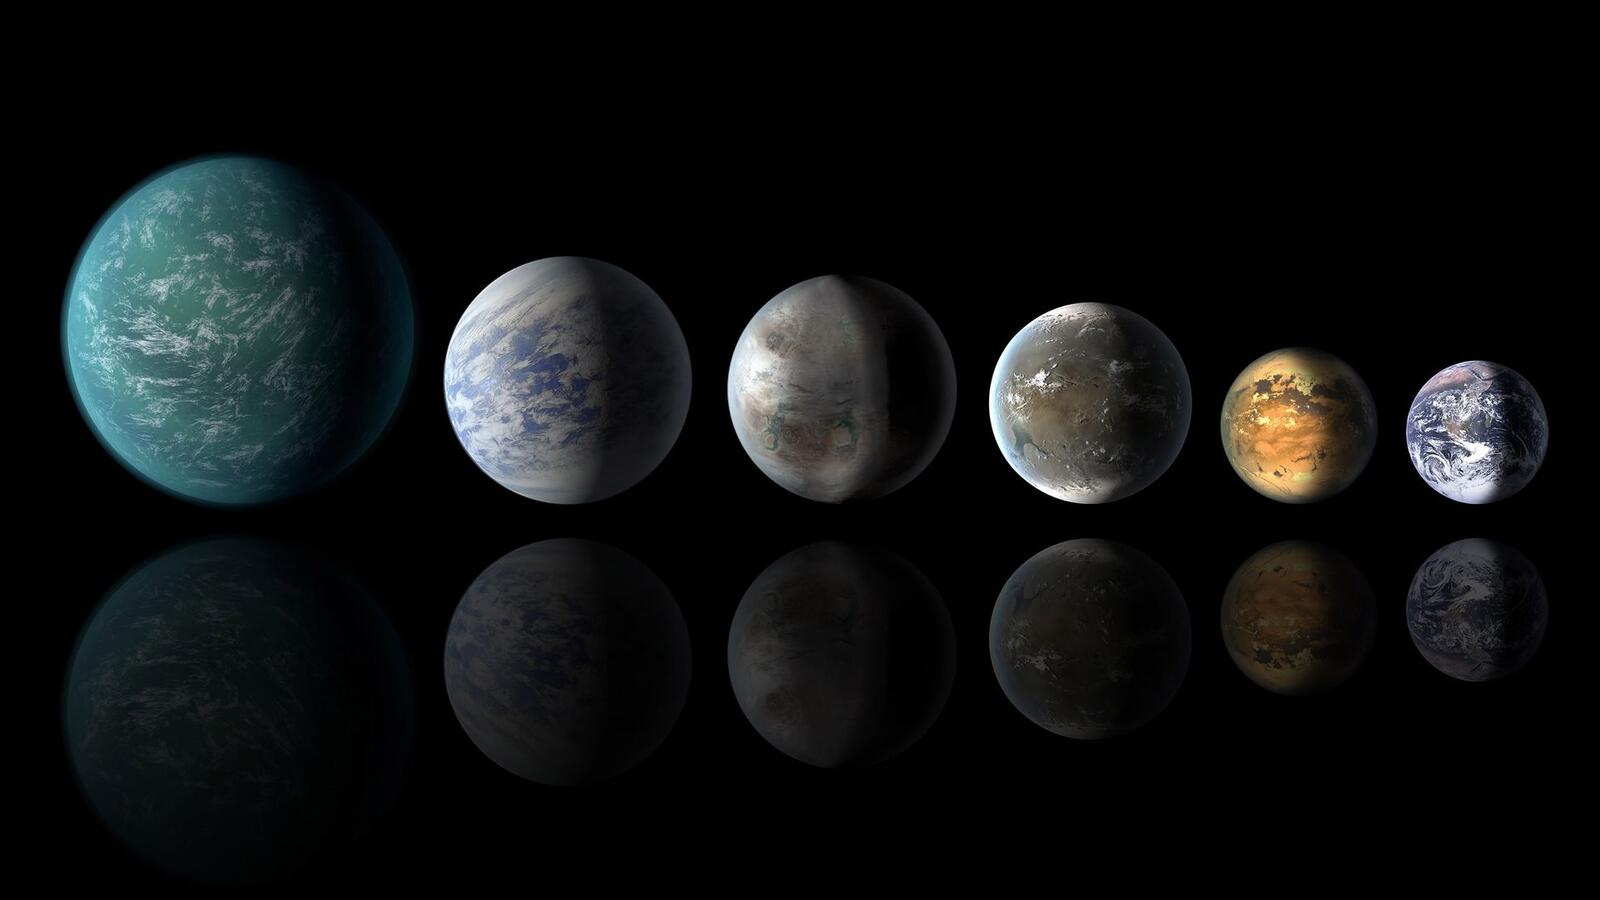 Wallpapers wallpaper solar system planets the universe on the desktop